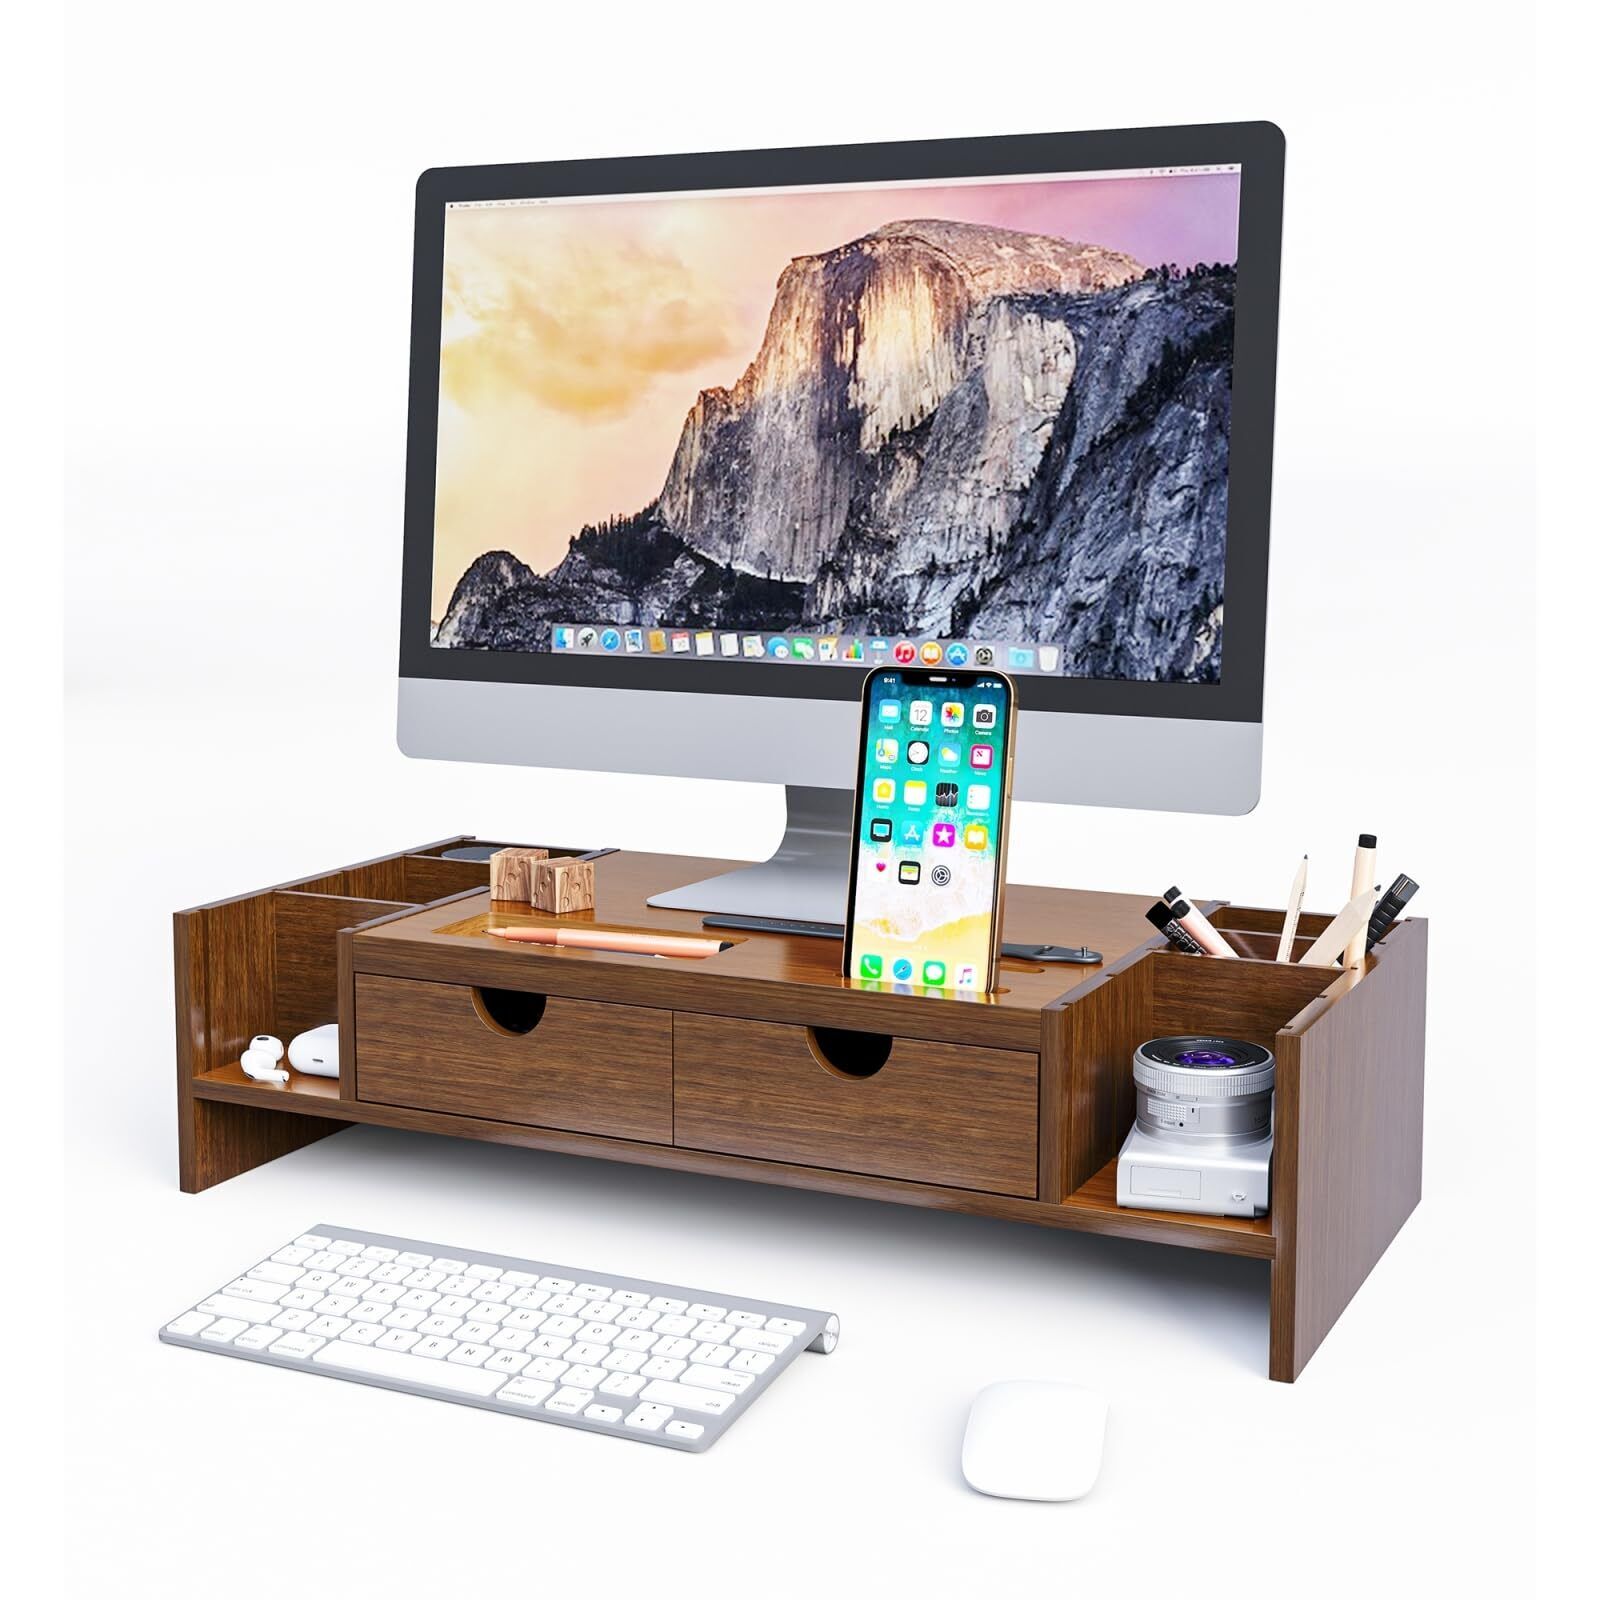 Crestlive Products Monitor Stand Riser, Bamboo Computer Desk Organizer with A...